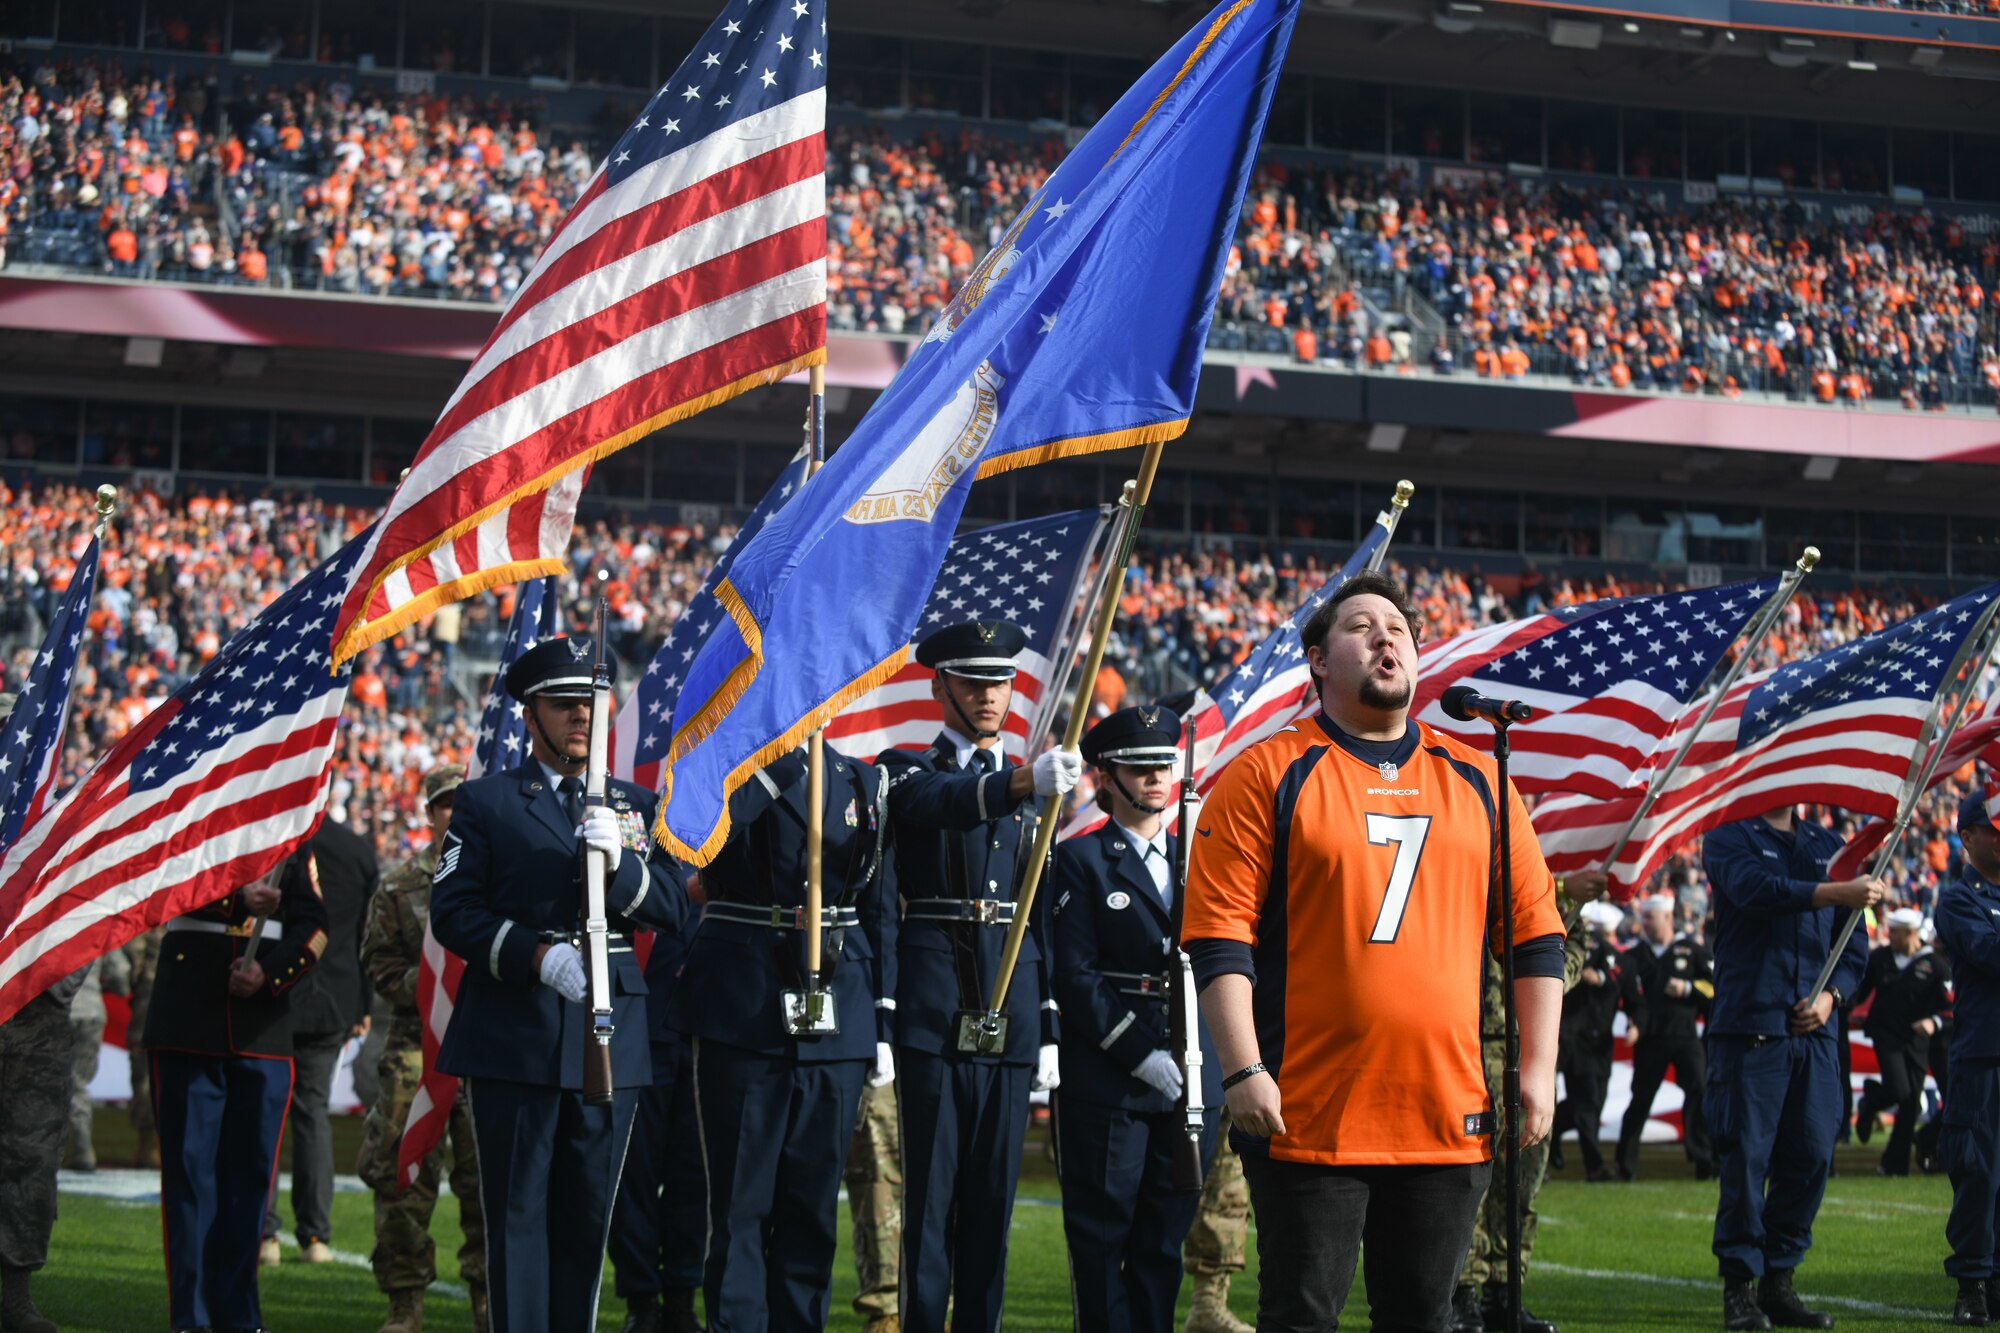 U.S. military service members stand at attention as Zach Kononov sings the national anthem, before the Denver Broncos Salute to Service game, at Empower Field at Mile High in Denver Nov. 3, 2019.